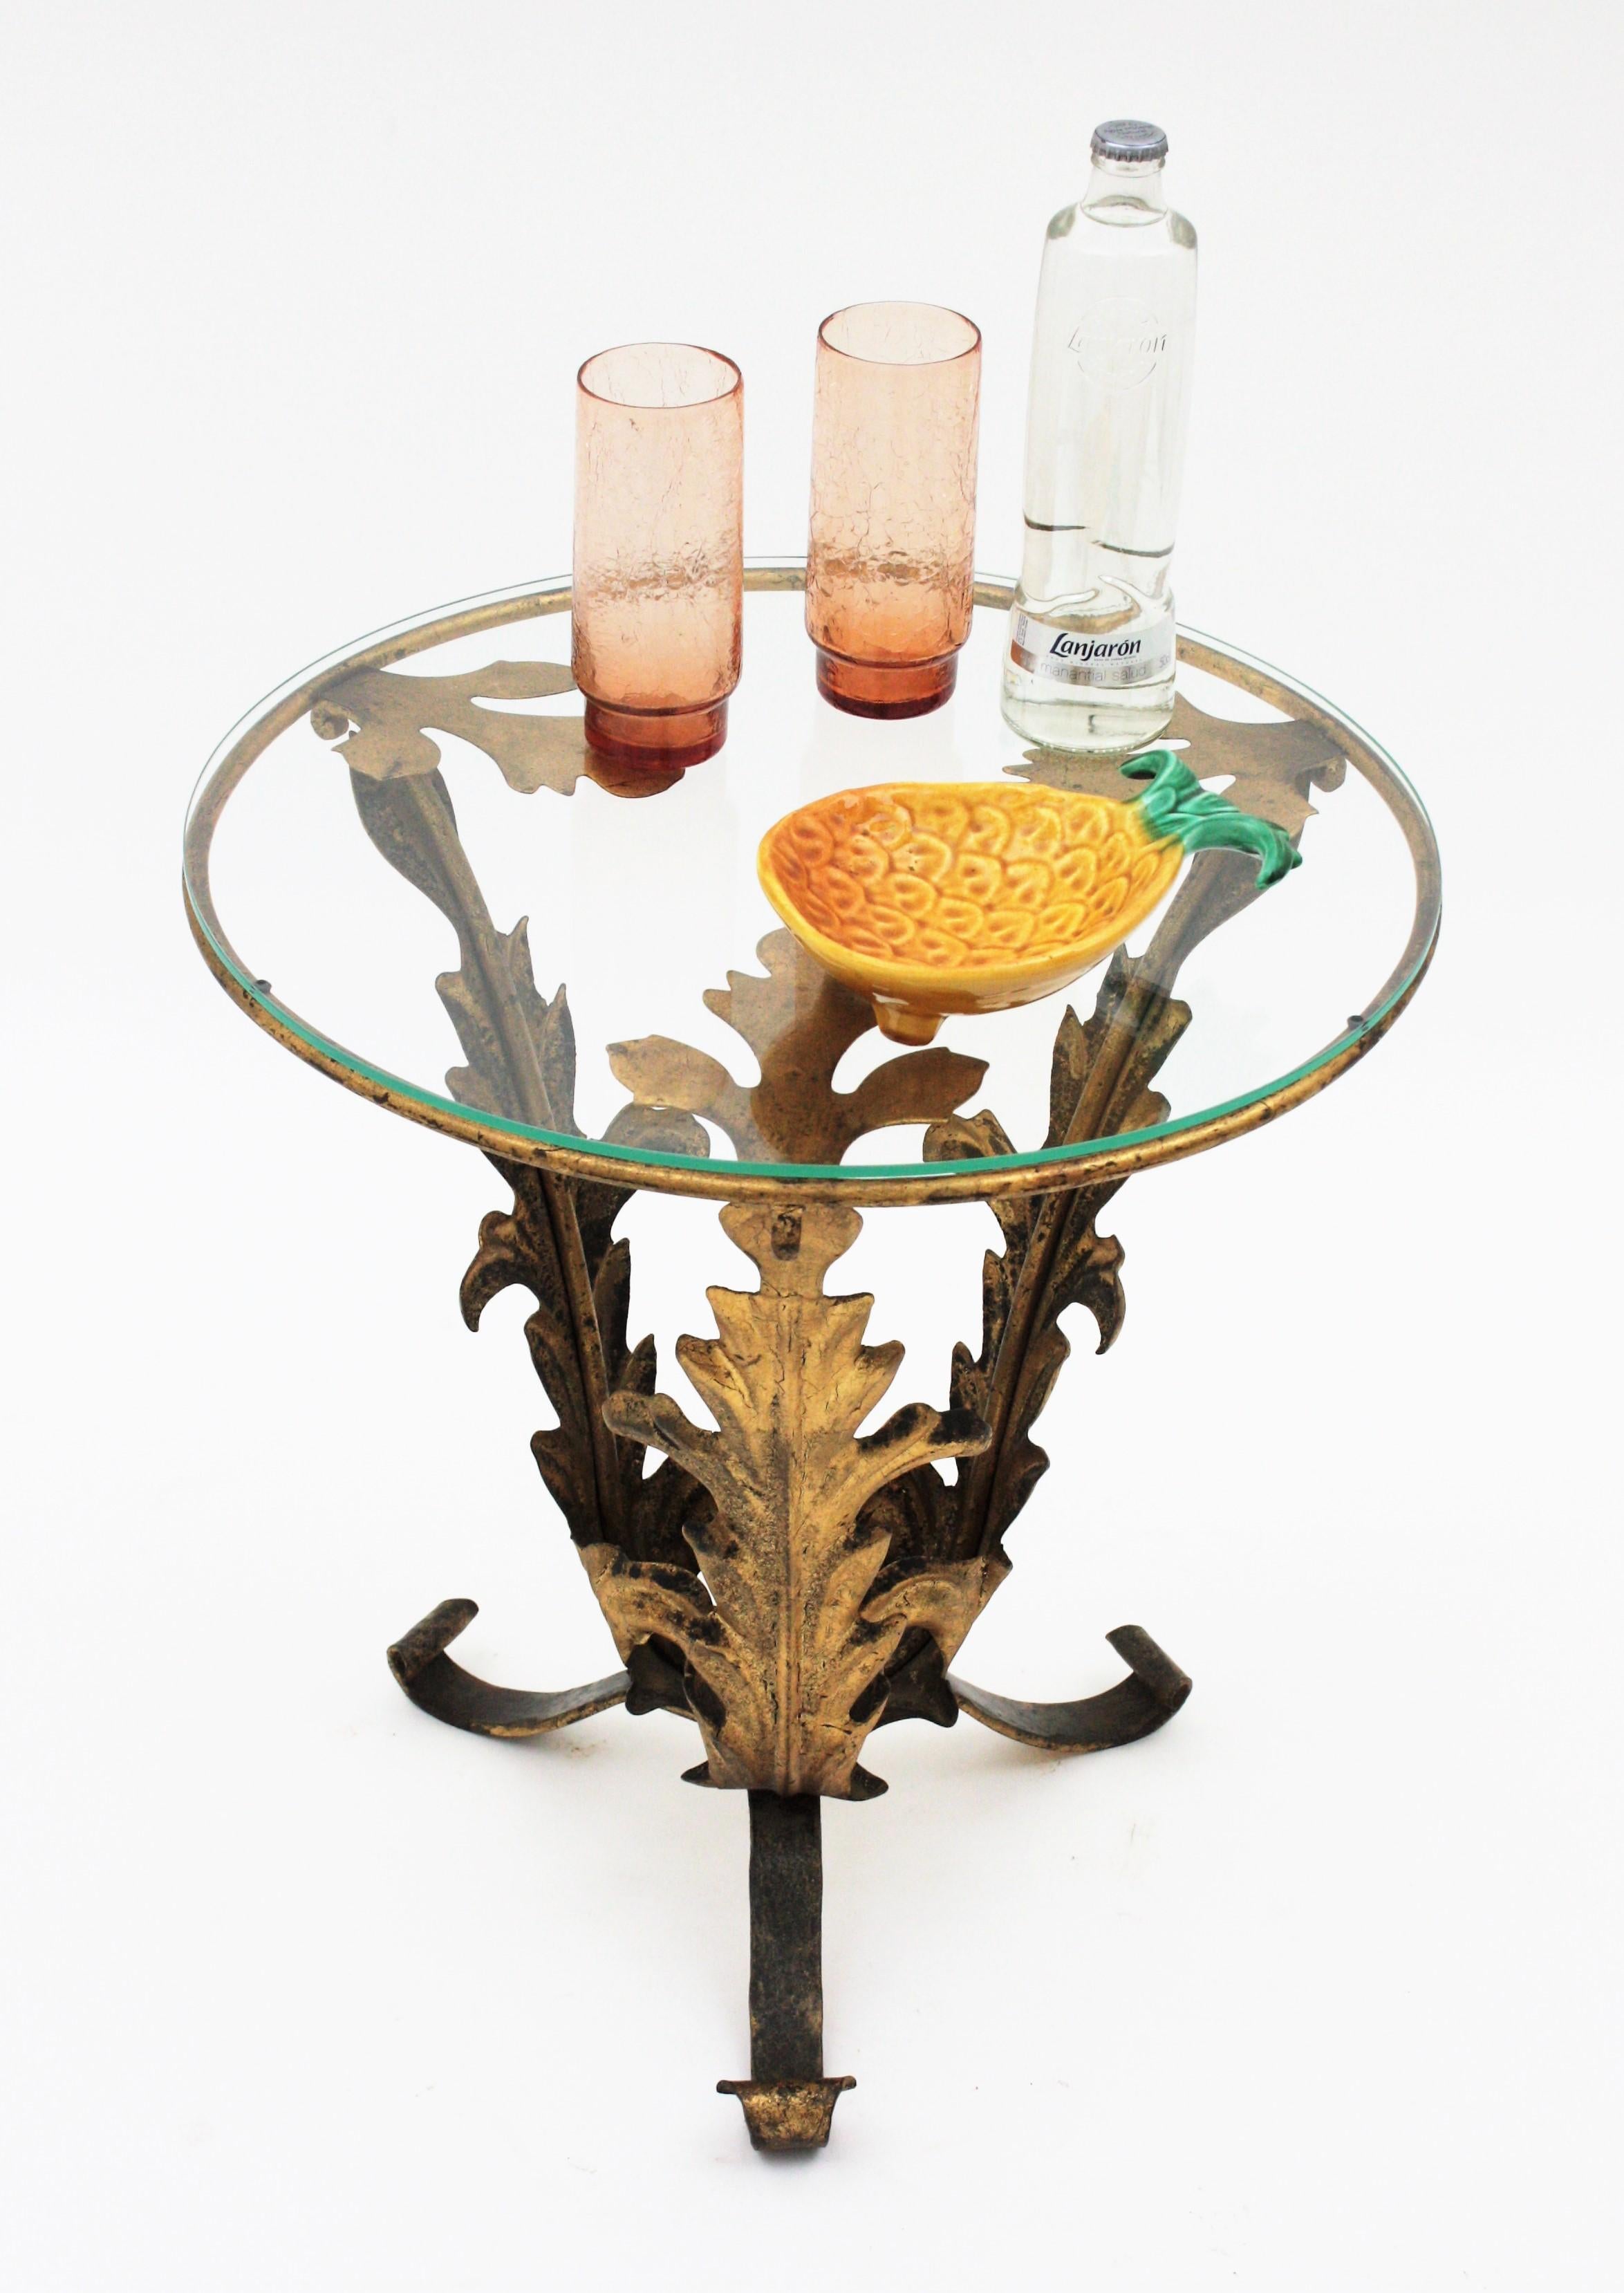 Spanish Drinks Table or Side Table with Foliage Design, Spain, 1940s
Materials: Iron, Gold Leaf, Glass
Stunning Hollywood Regency gilt iron  tripod table with foliage base and glass top.
This beautiful hand wrought iron round table stands up on